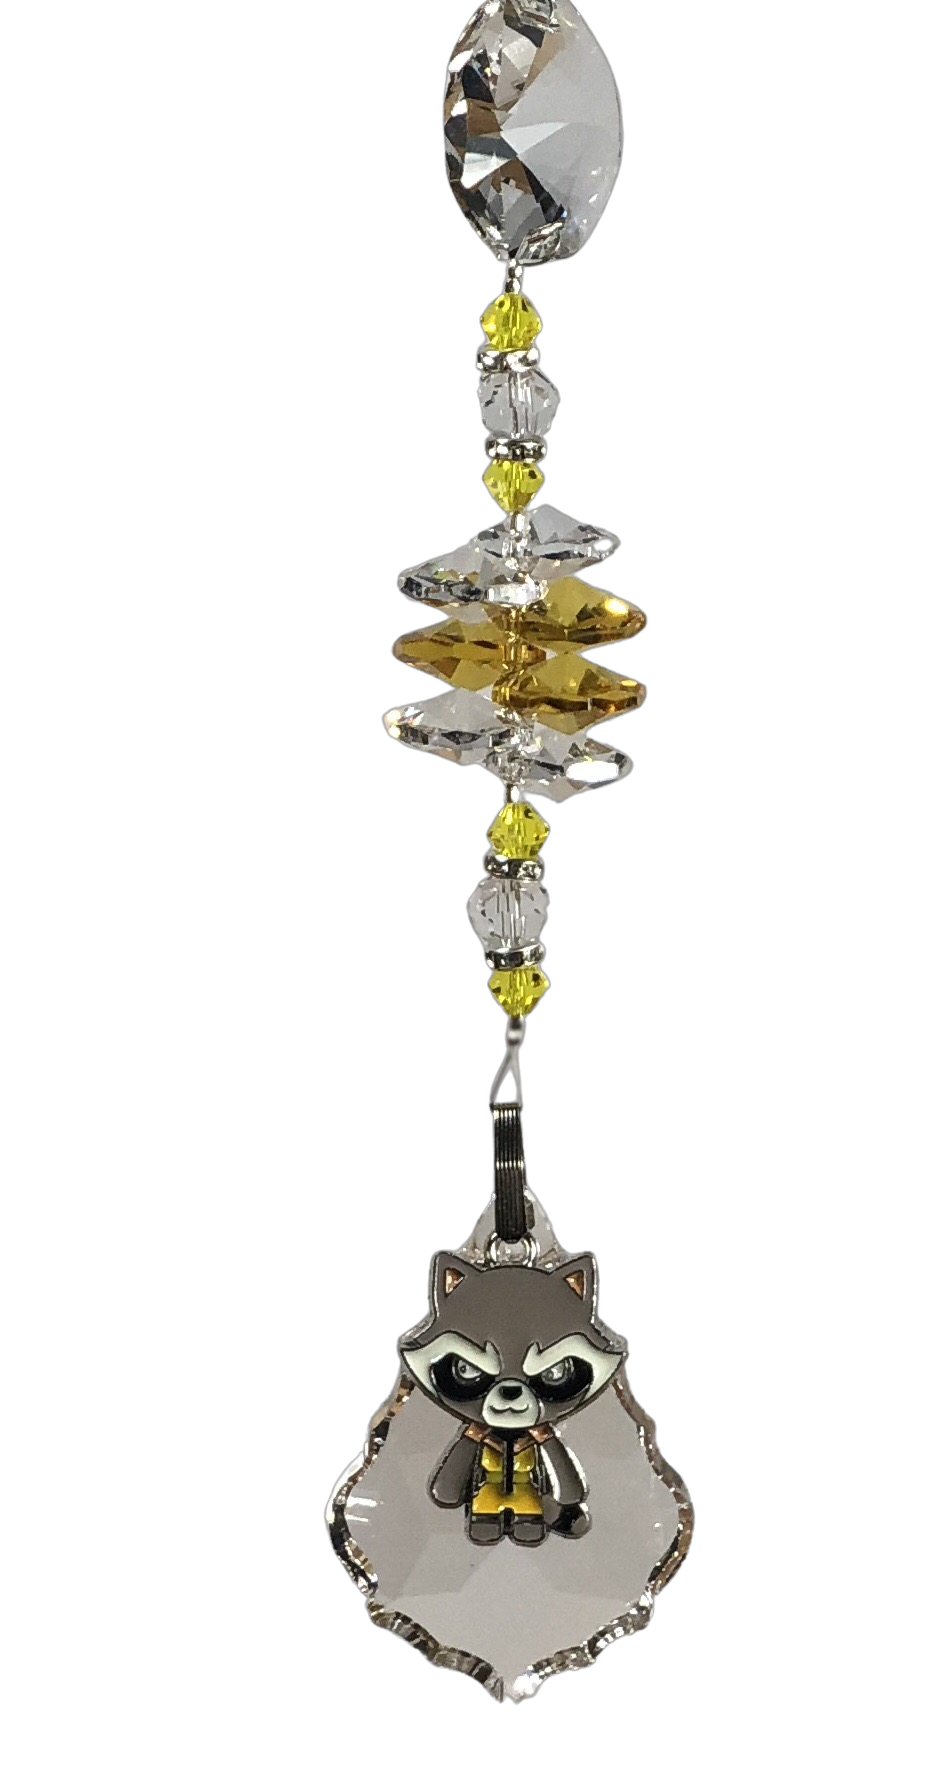 Guardians on the Galaxy - Rocket crystal suncatcher, decorated with 50mm Starburst crystal and citrine gemstone.